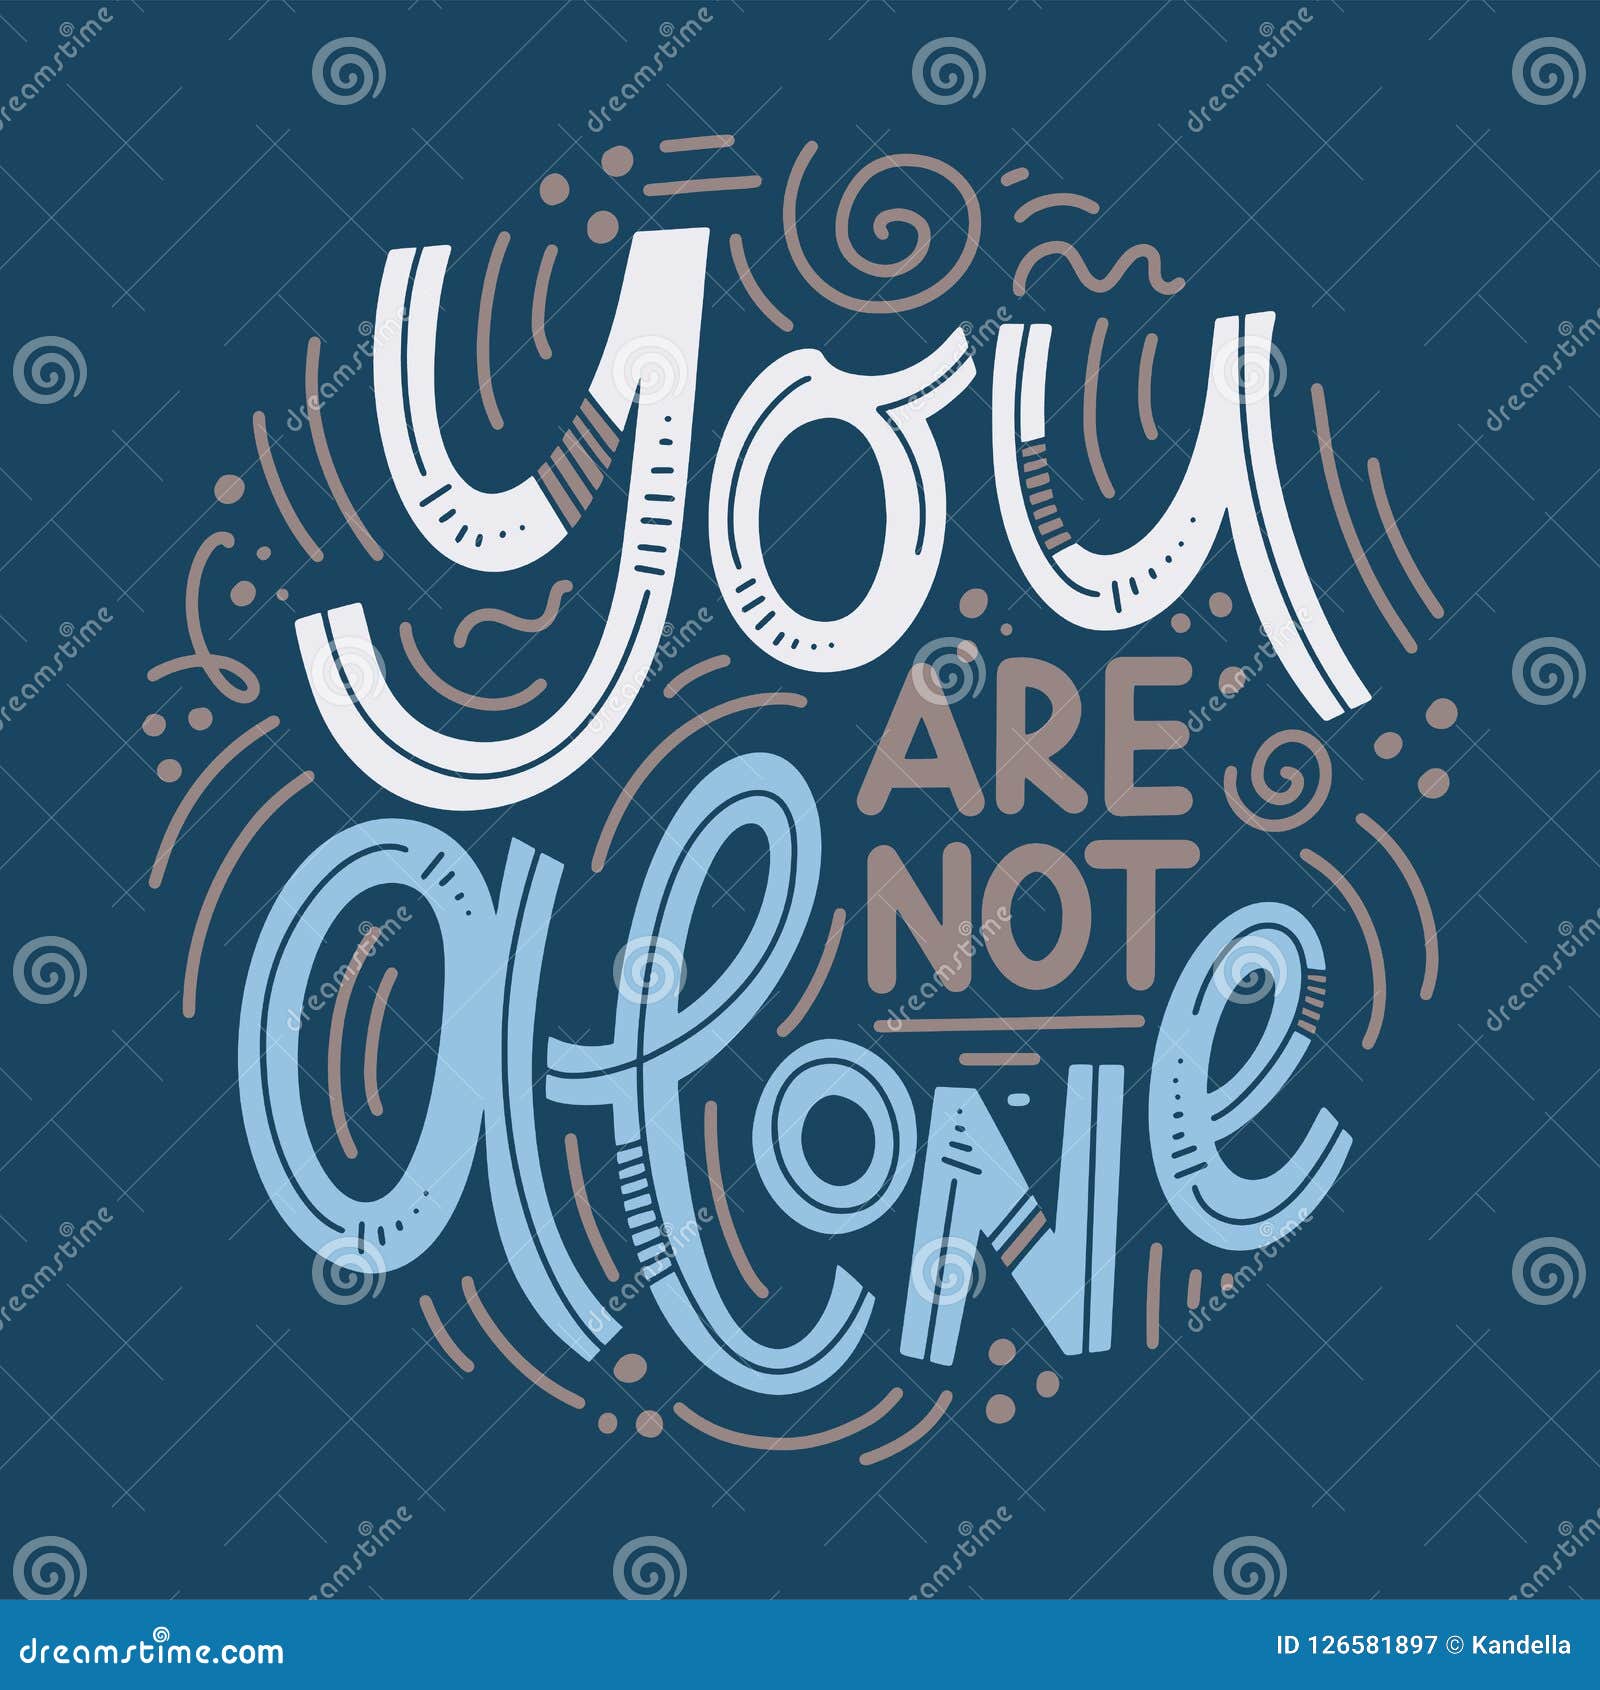 Inspirational Quotes For Mental Health Day Stock Vector